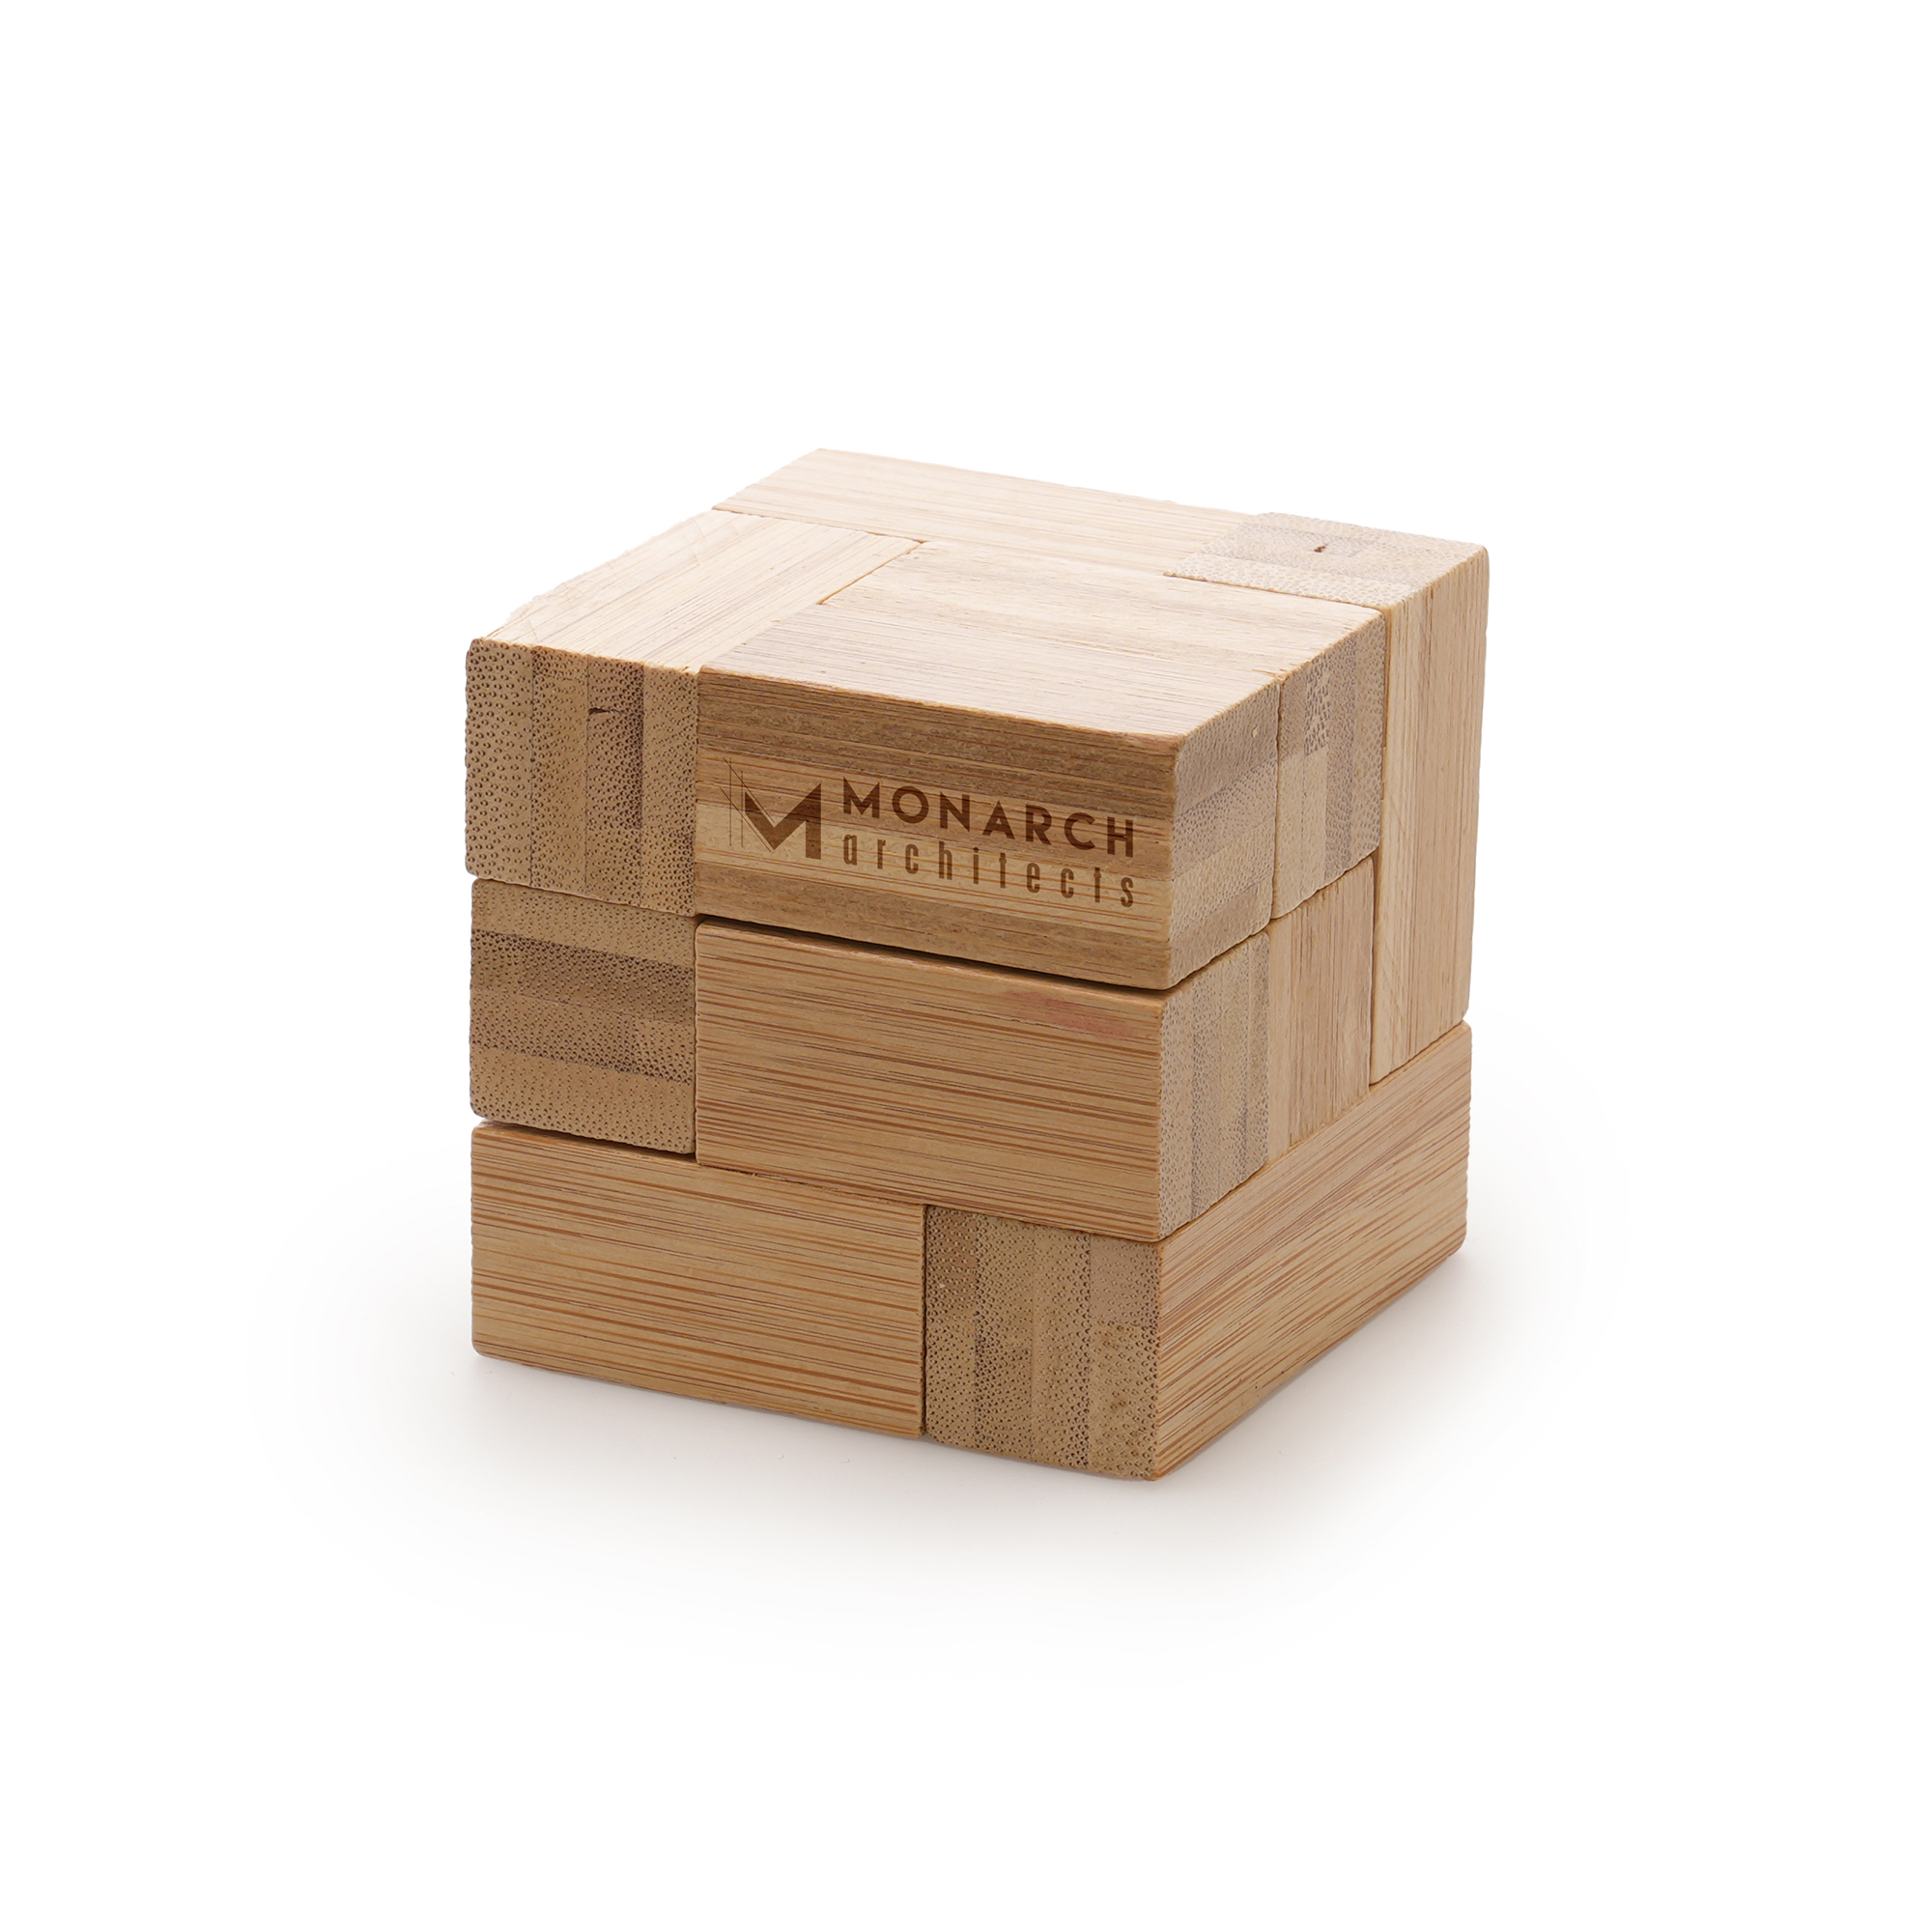 A 7 piece wooden puzzle. Try to piece together the blocks to form a perfect cube! Available in natural wood with the choice to engrave or print each block. Price dependant on how many blocks are branded.